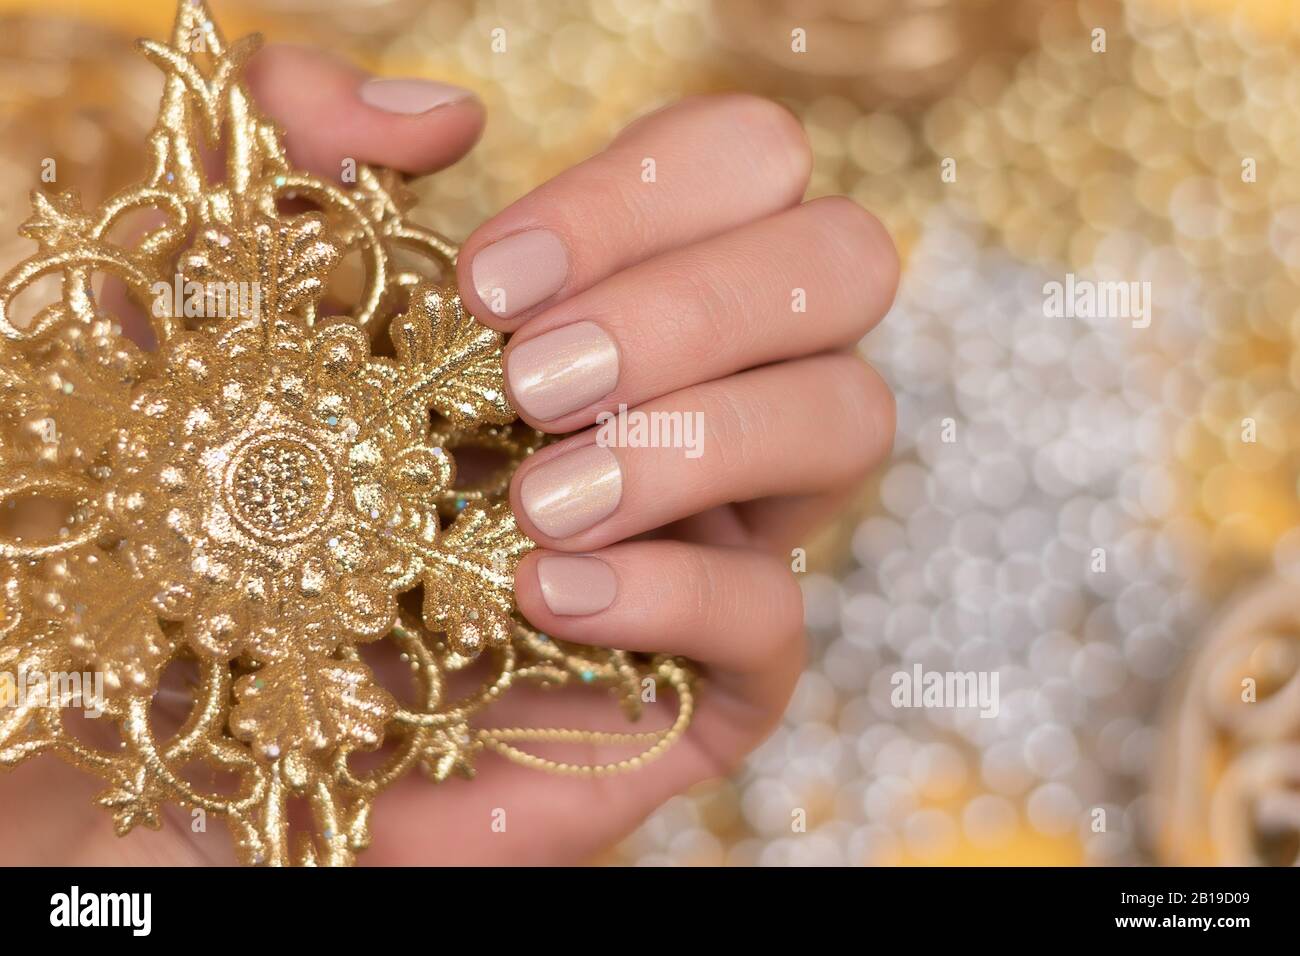 Female hand with nude glitter nail design. Stock Photo